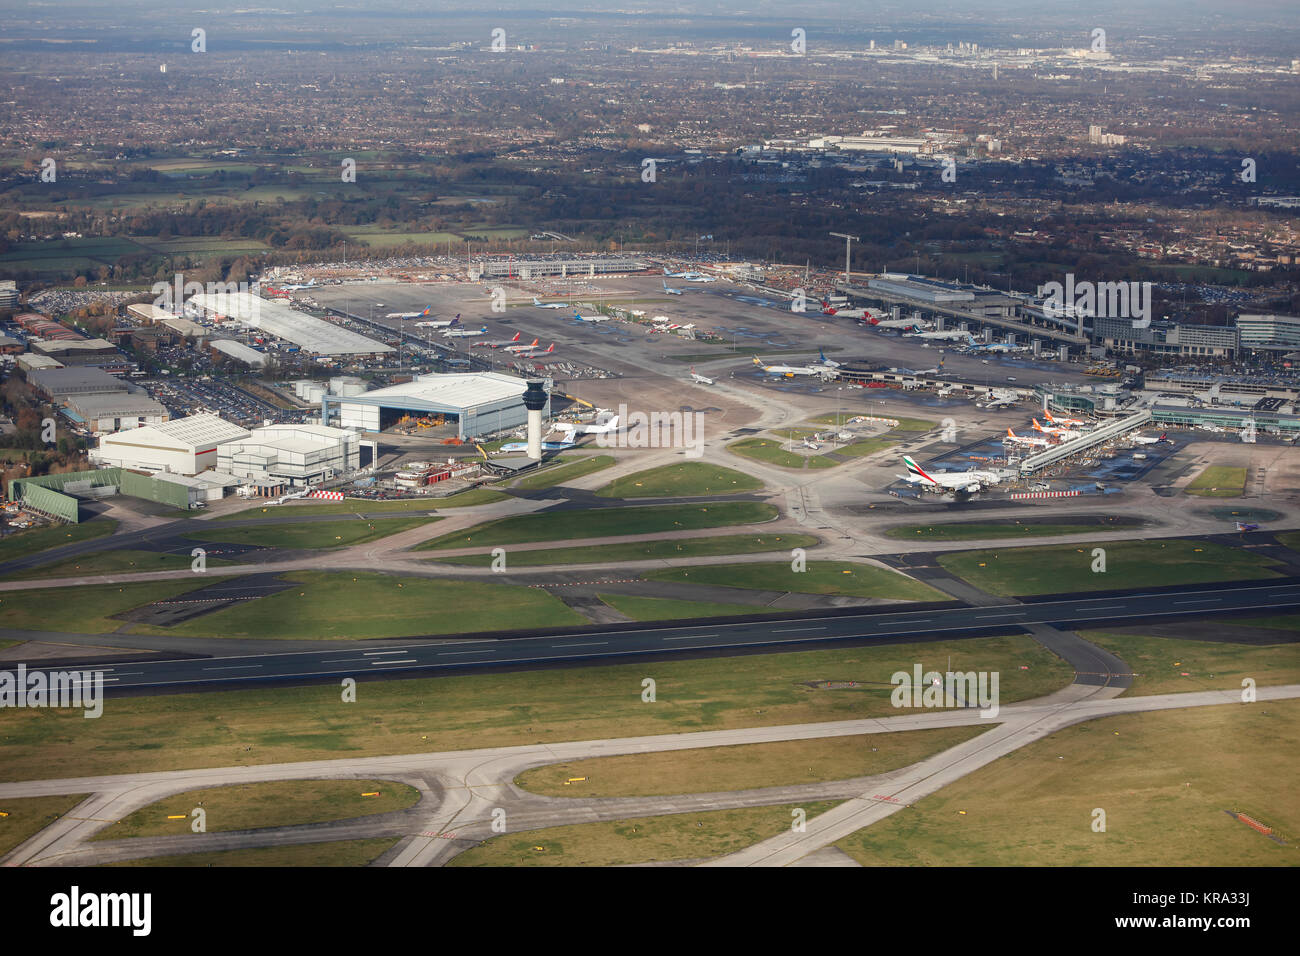 An aerial view showing hangars, the control tower, aprons and terminals of Manchester Airport. Stock Photo